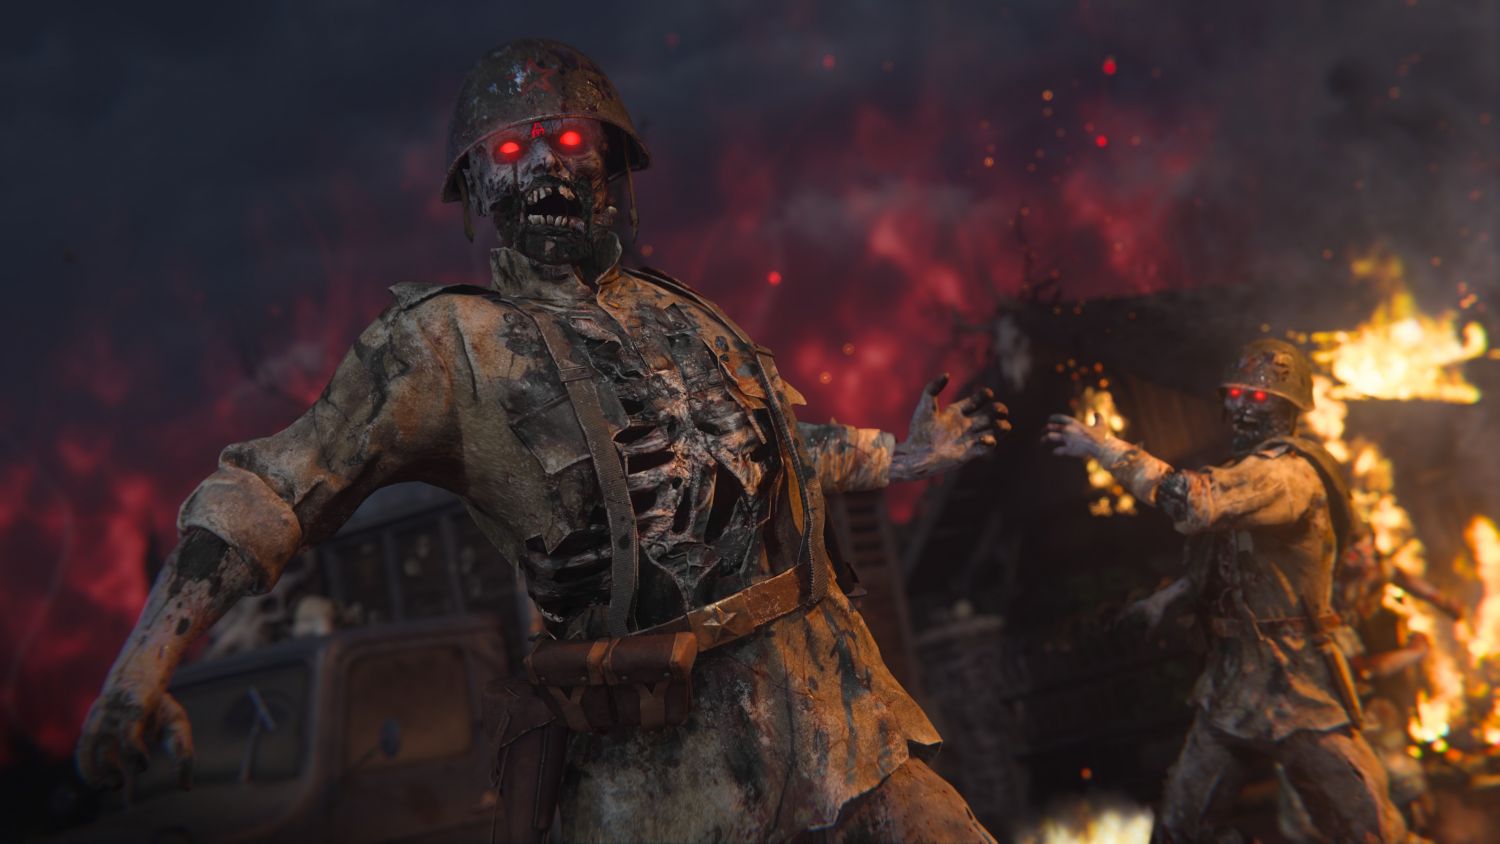 The Zombies mode is disappointingly barebones in Call of Duty: Vanguard.